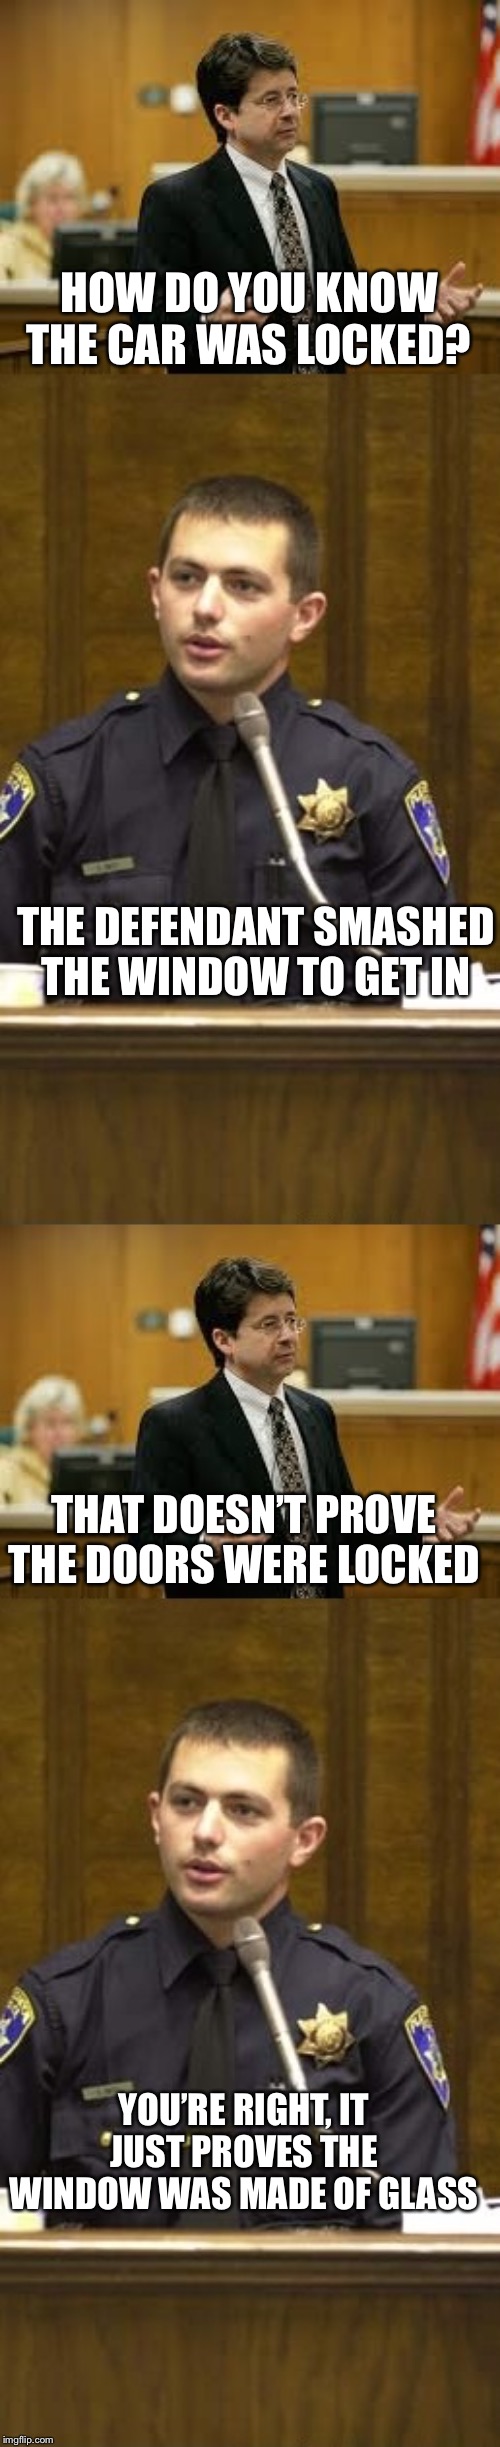 Lawyer and Cop testifying | HOW DO YOU KNOW THE CAR WAS LOCKED? YOU’RE RIGHT, IT JUST PROVES THE WINDOW WAS MADE OF GLASS THE DEFENDANT SMASHED THE WINDOW TO GET IN THA | image tagged in lawyer and cop testifying | made w/ Imgflip meme maker